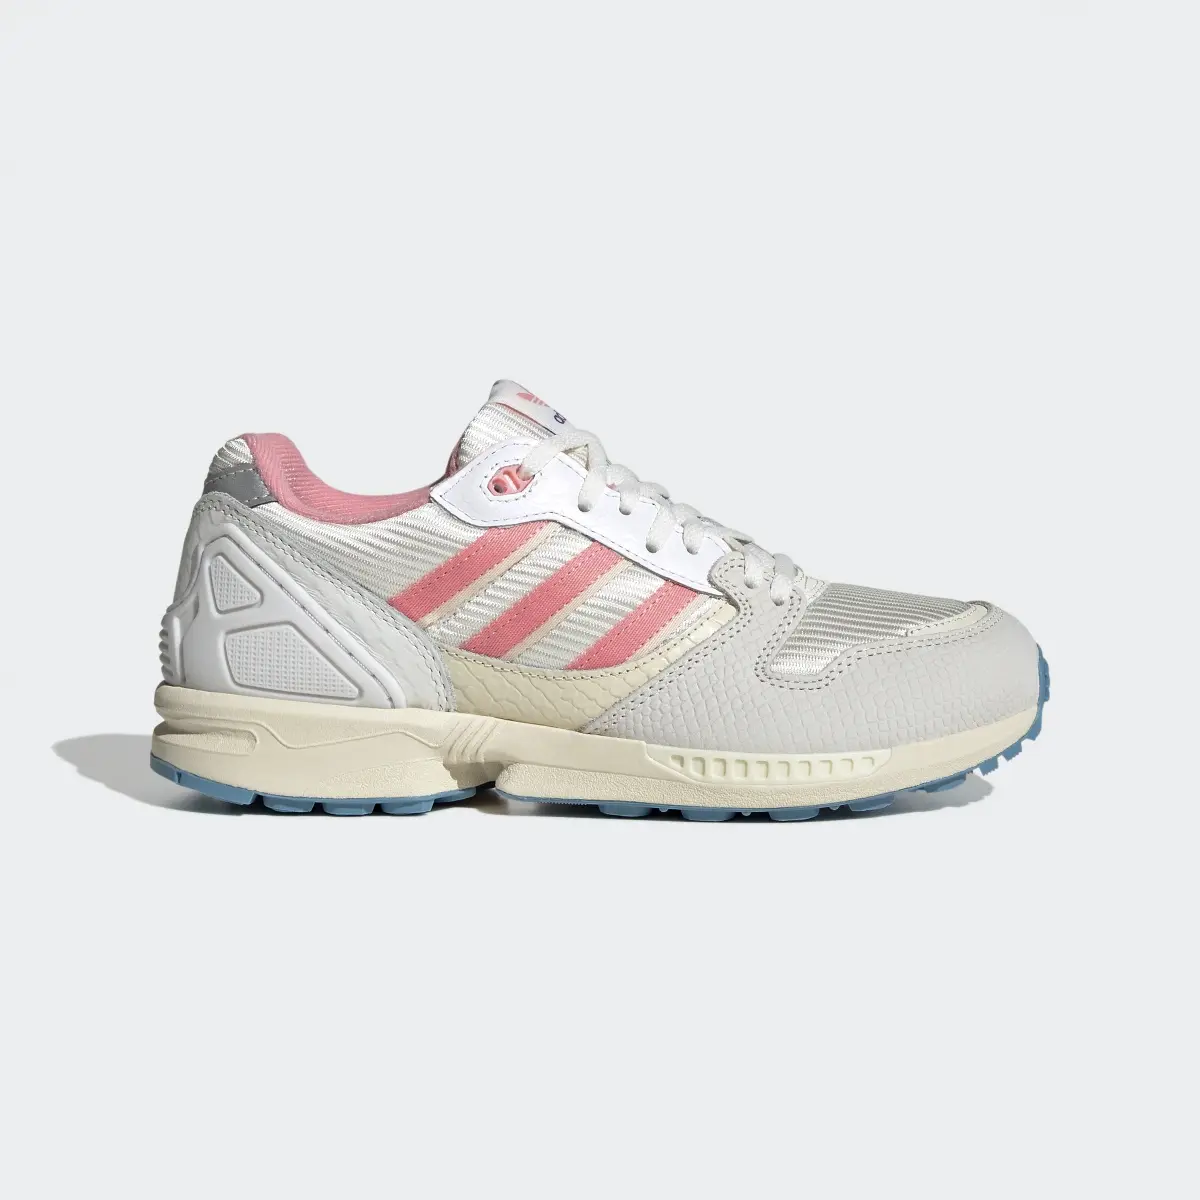 Adidas ZX 5020 Shoes. 2